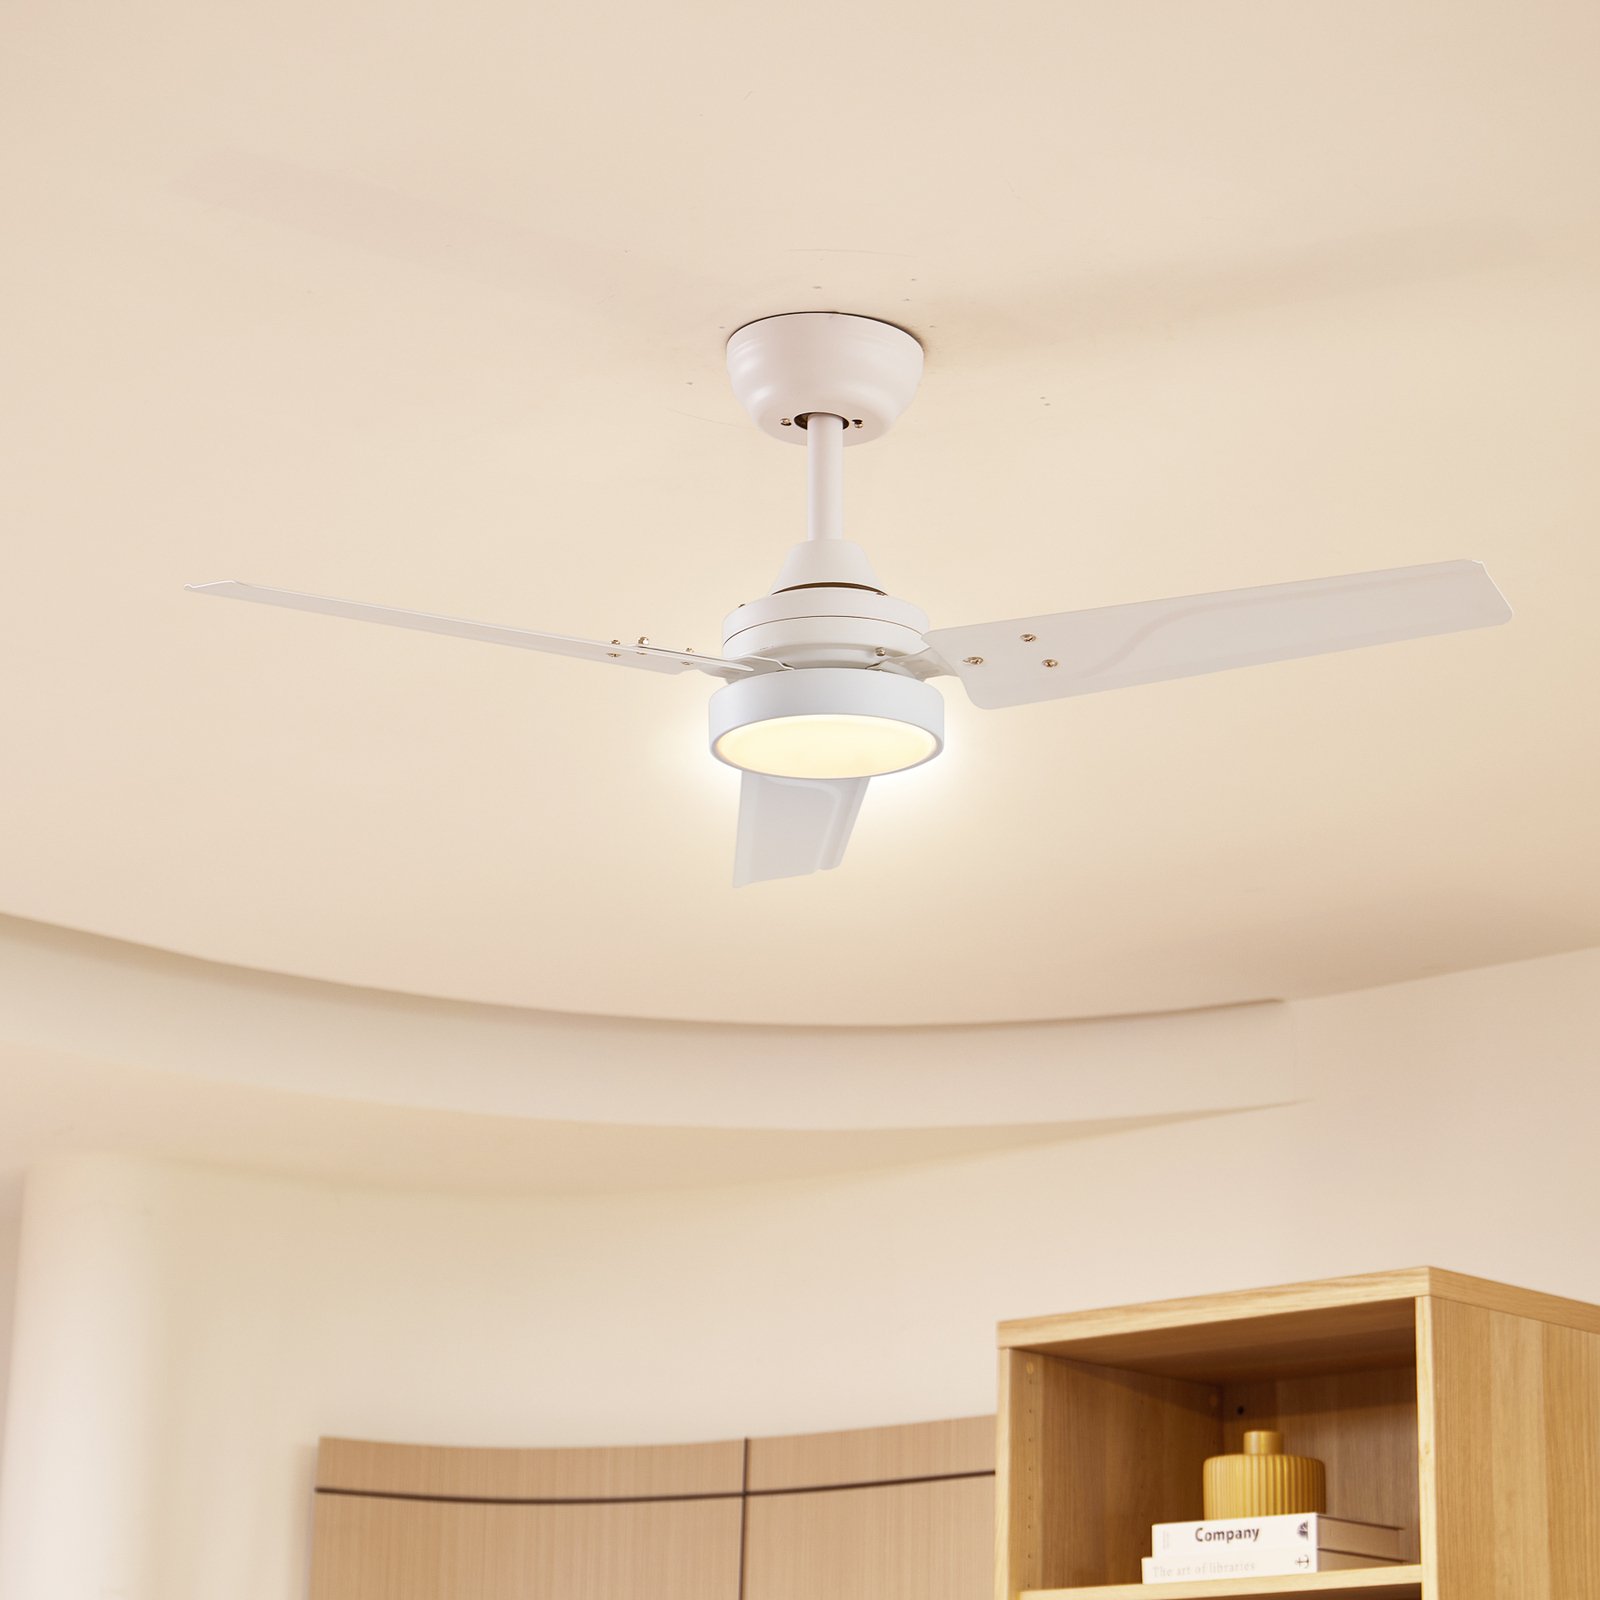 Lindby LED ceiling fan Aerallo, white, CCT, quiet